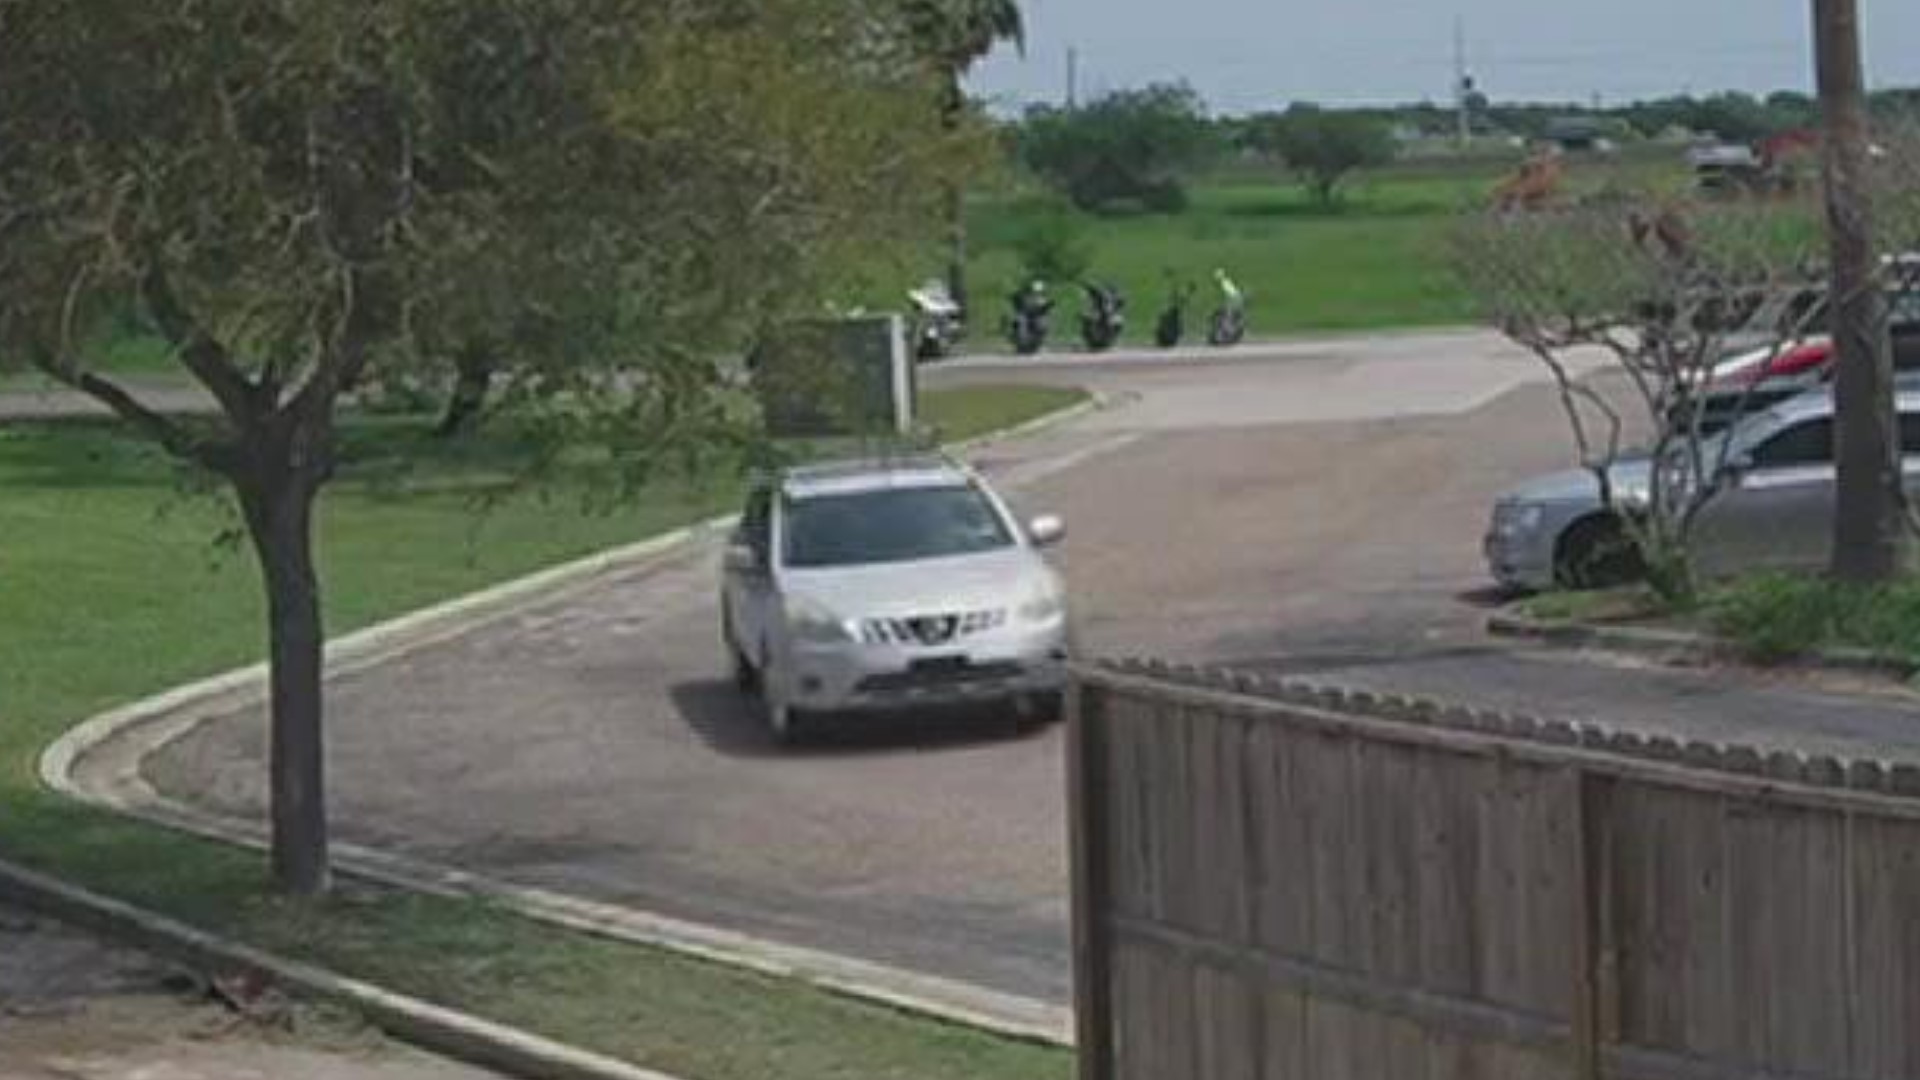 On Monday, Oct. 3, CCPD released surveillance video of a car, a gray Nissan Rogue, that may have been used by the suspect or suspects in the shooting.